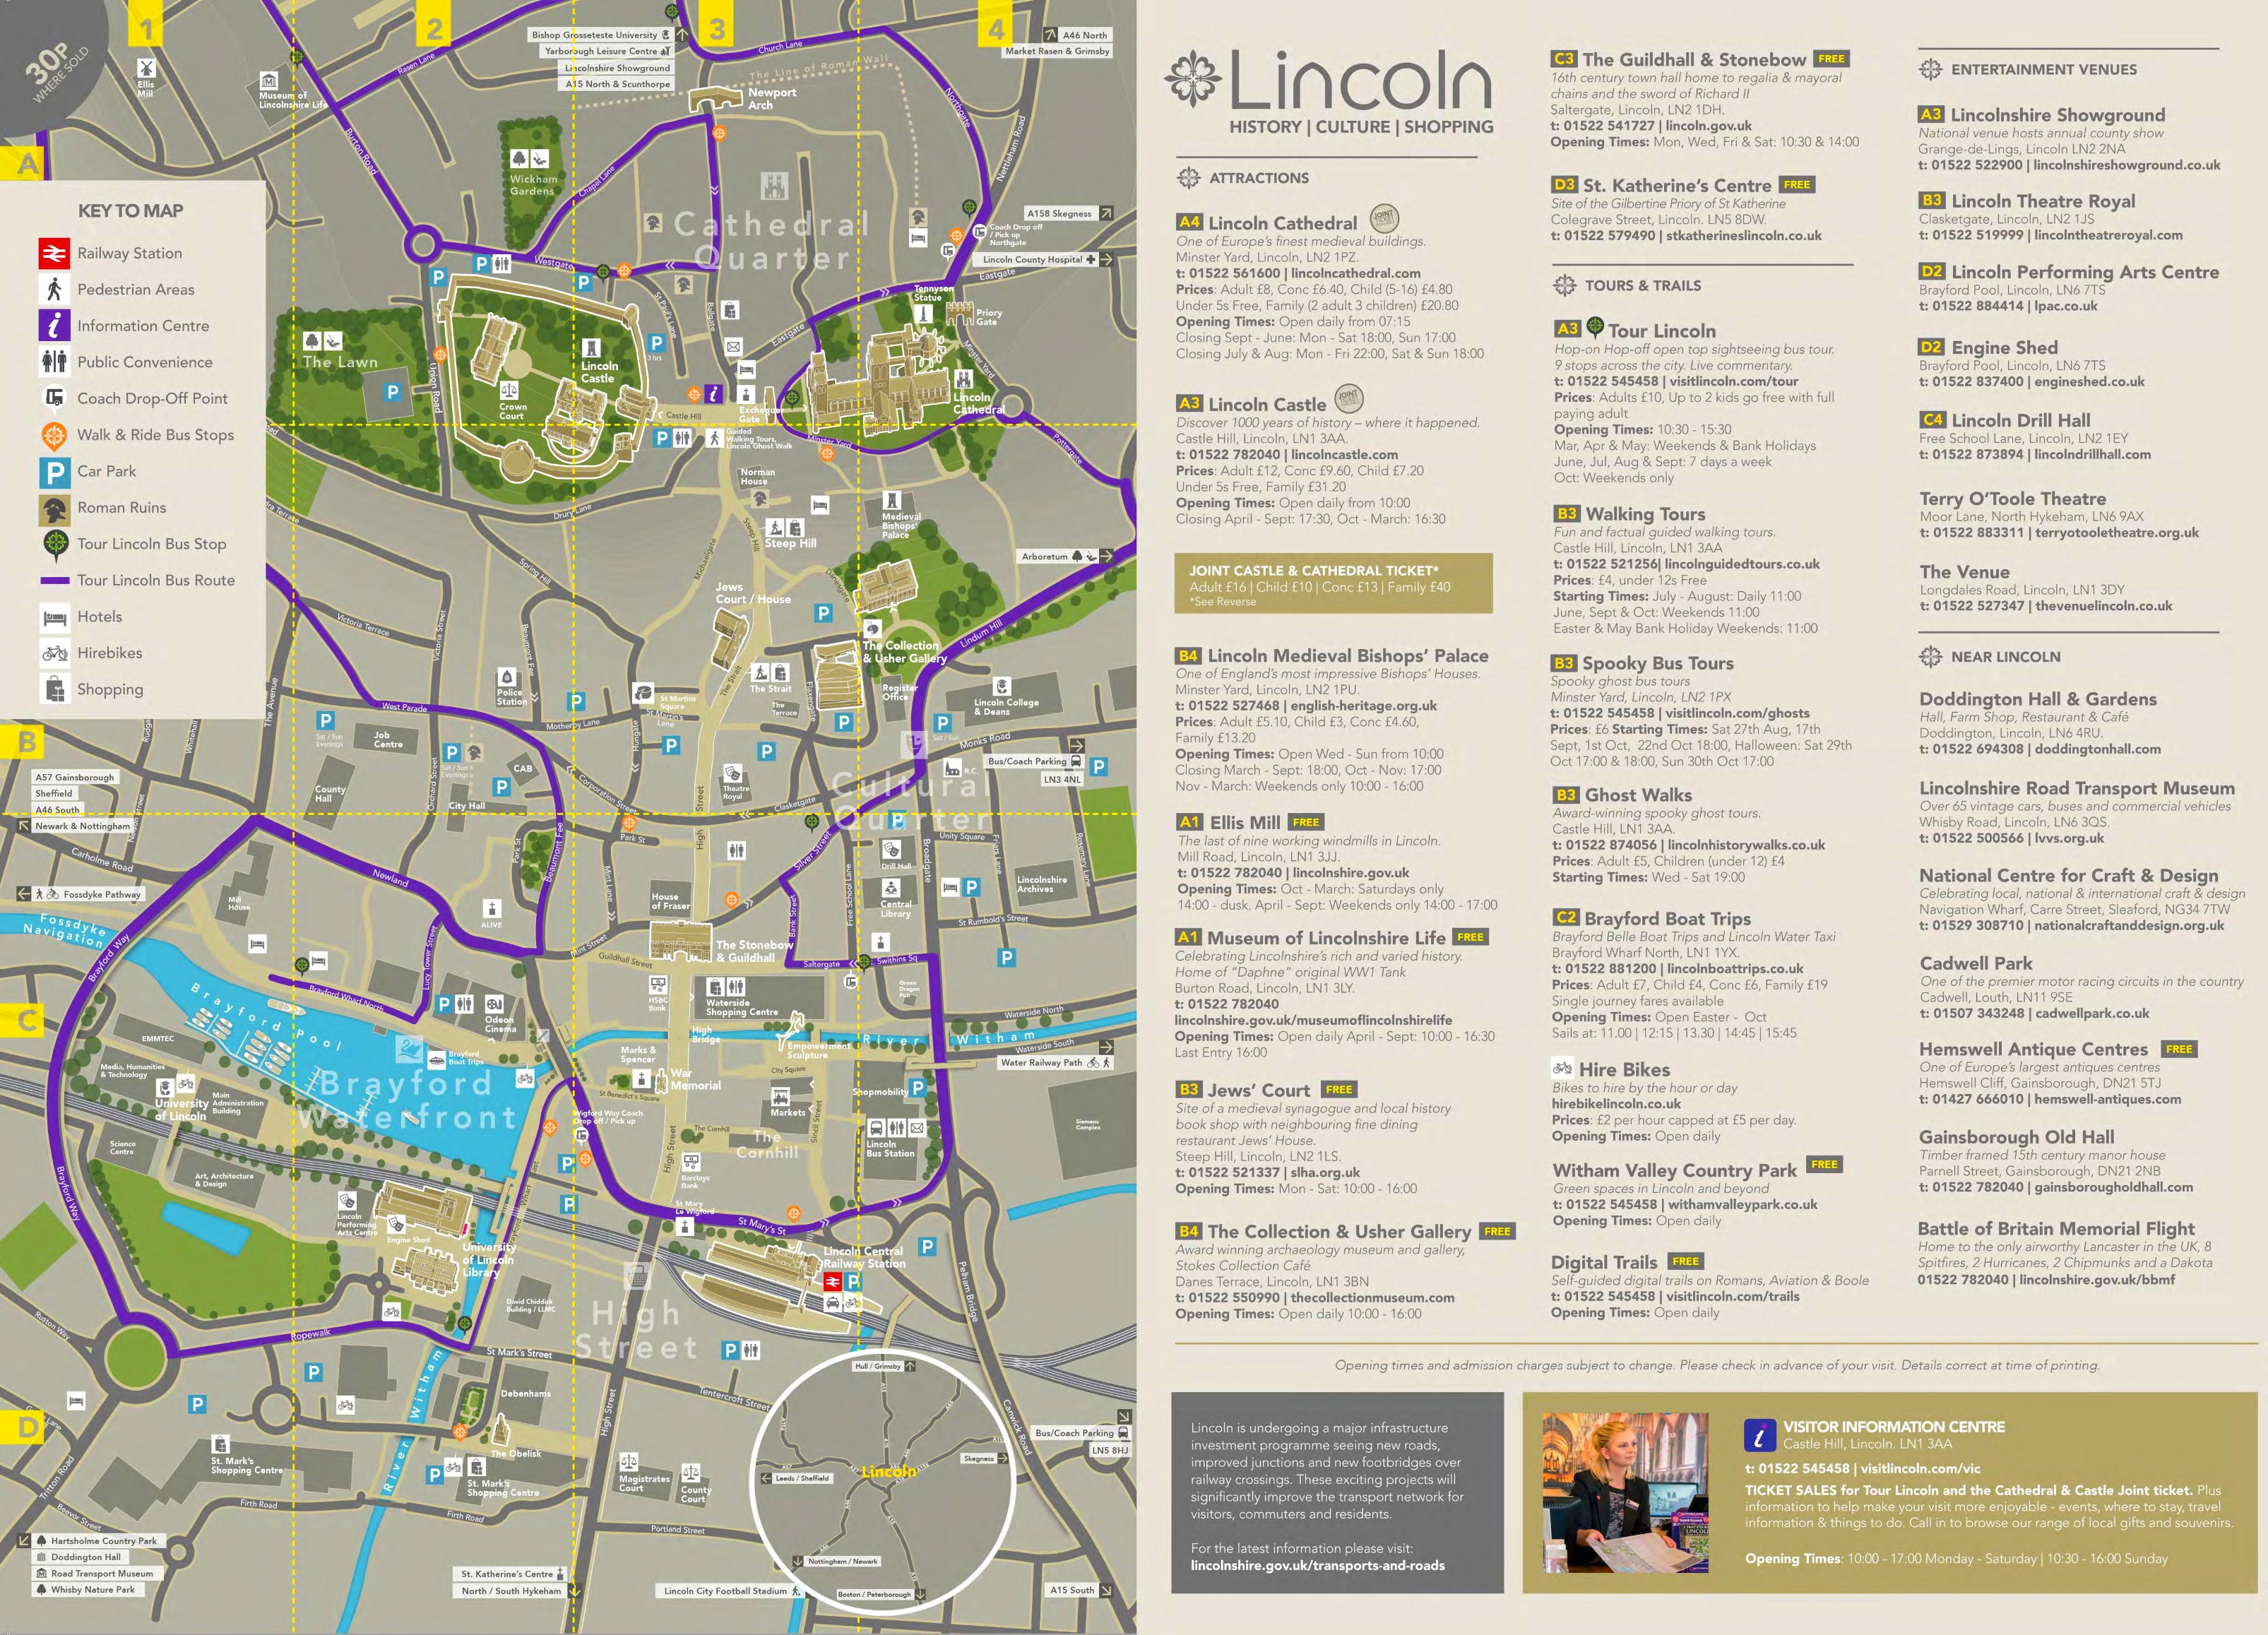 Lincoln sightseeing map3211 x 2315